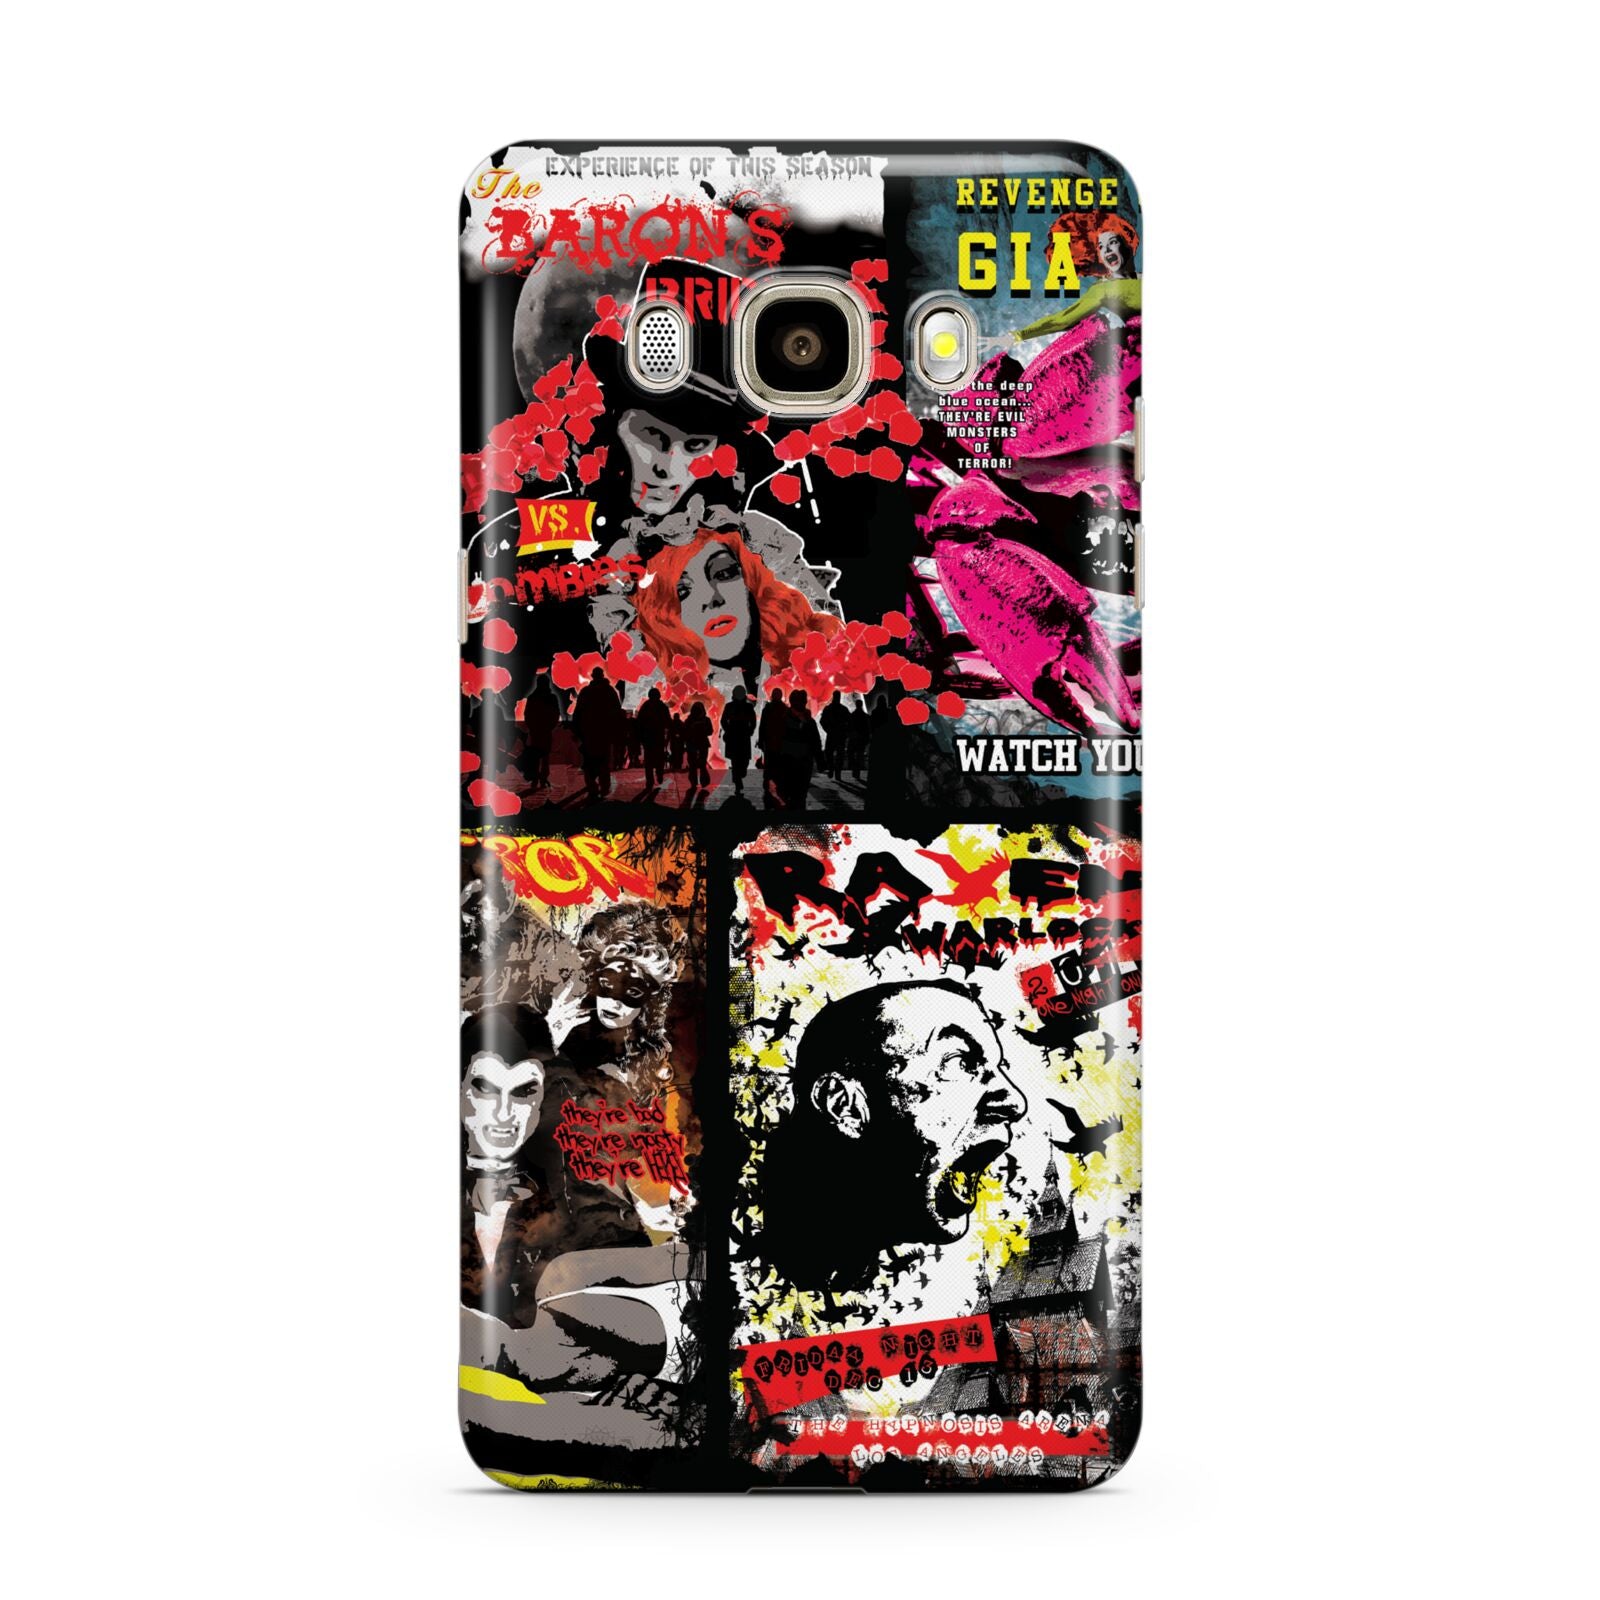 B Movie Posters Samsung Galaxy J7 2016 Case on gold phone